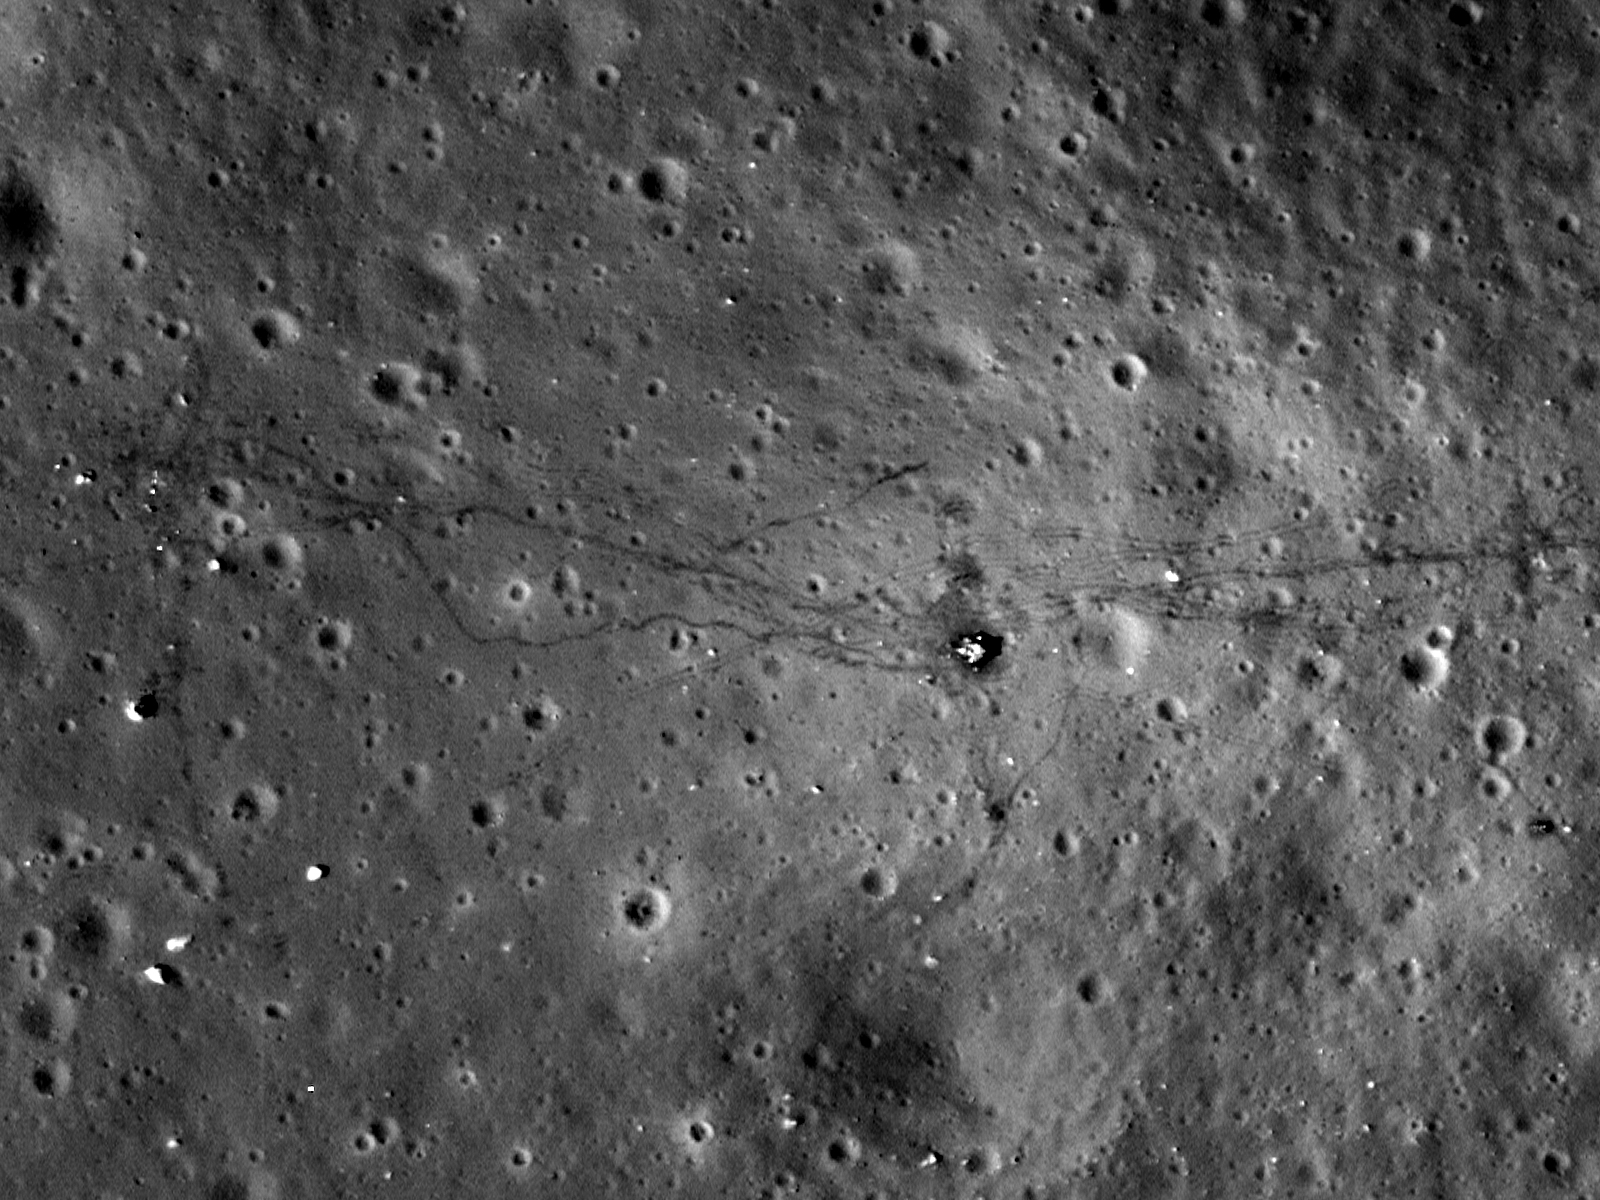 view of Apollo 17 landing site, as captured by NASA's Lunar Reconnaissance Orbiter